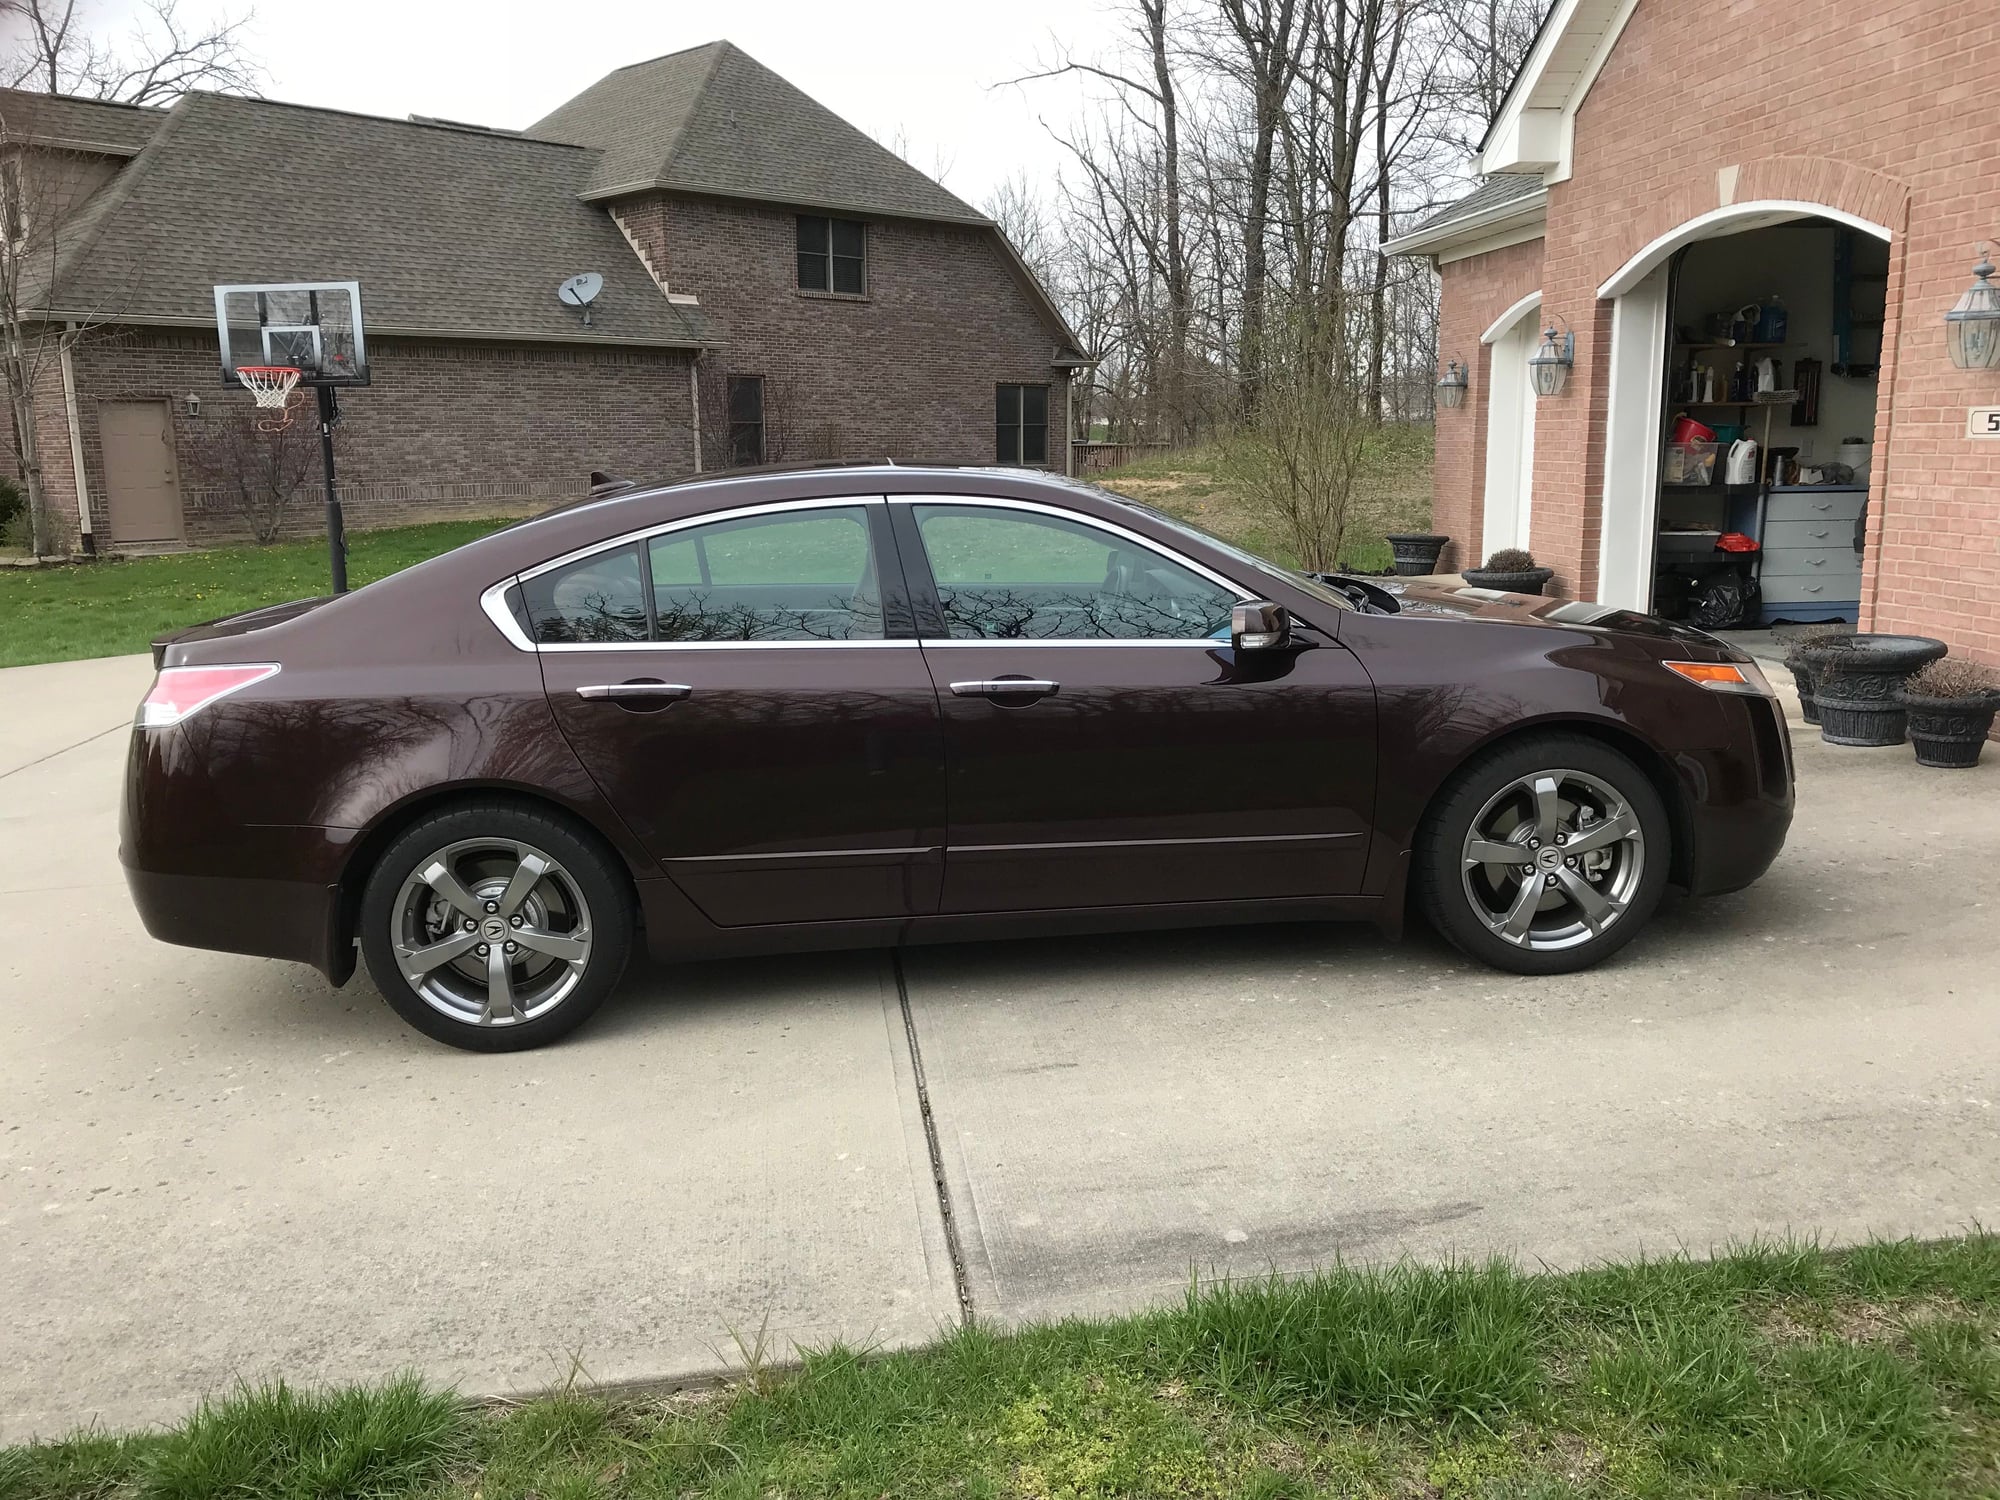 2010 Acura TL - SOLD: 2010 TL SH-AWD 6MT Mayan Bronze / Umber -1 owner, no accidents, no dings - Used - VIN 19UUA9E57AA006138 - 113,000 Miles - 6 cyl - AWD - Manual - Sedan - Brown - Pittsboro, IN 46167, United States